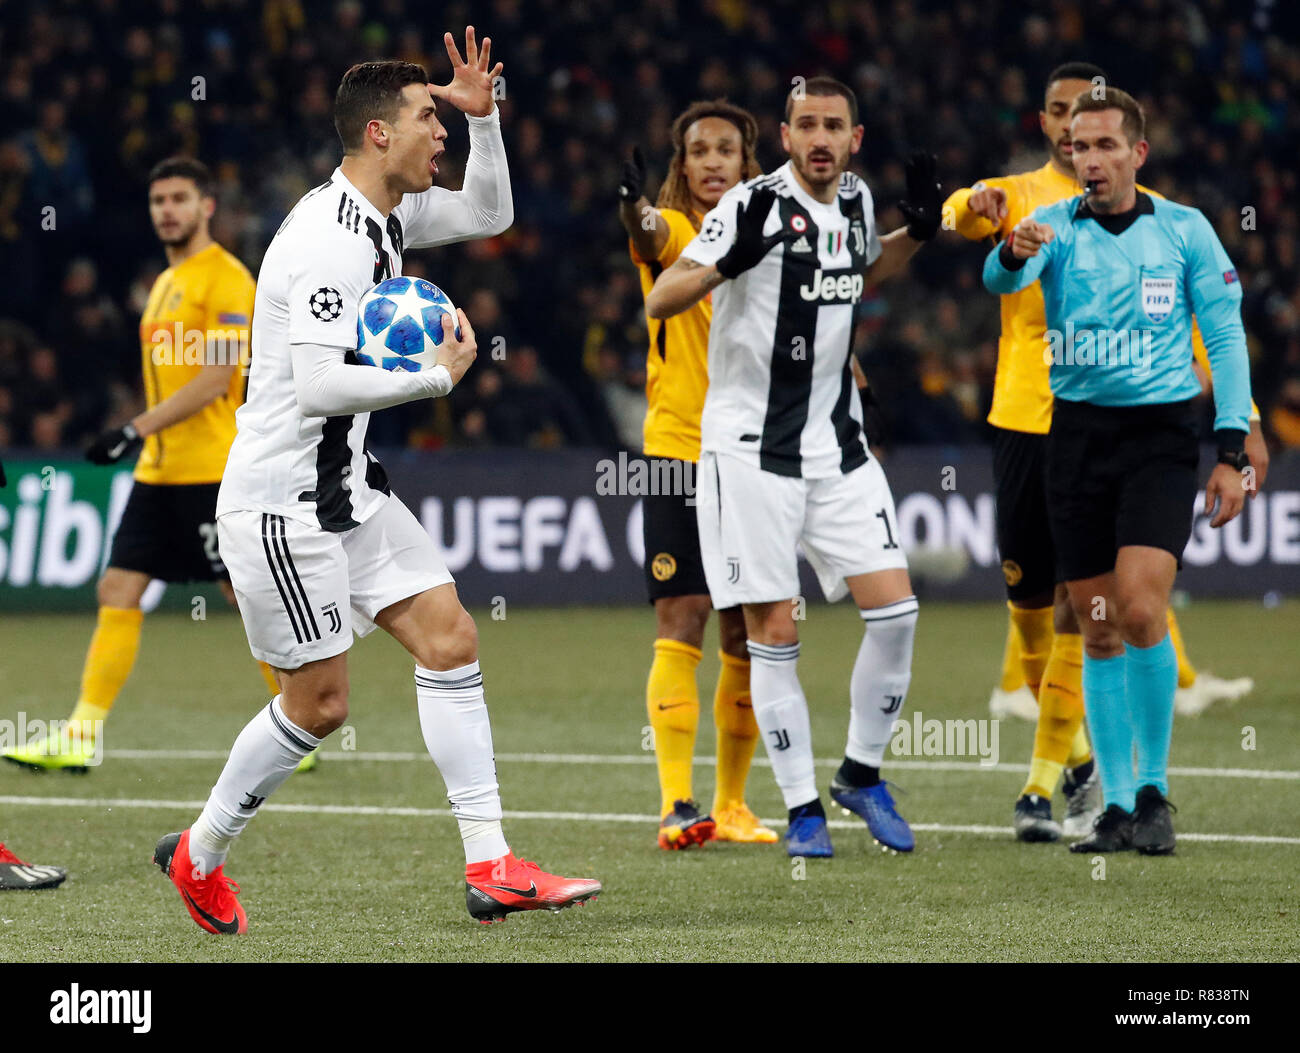 181213) -- BERN, Dec. 13, 2018 (Xinhua) -- Cristiano Ronaldo (2nd L) of  Juventus reacts during the UEFA Champions League Group H match between  Young Boys and Juventus in Bern, Switzerland, Dec.